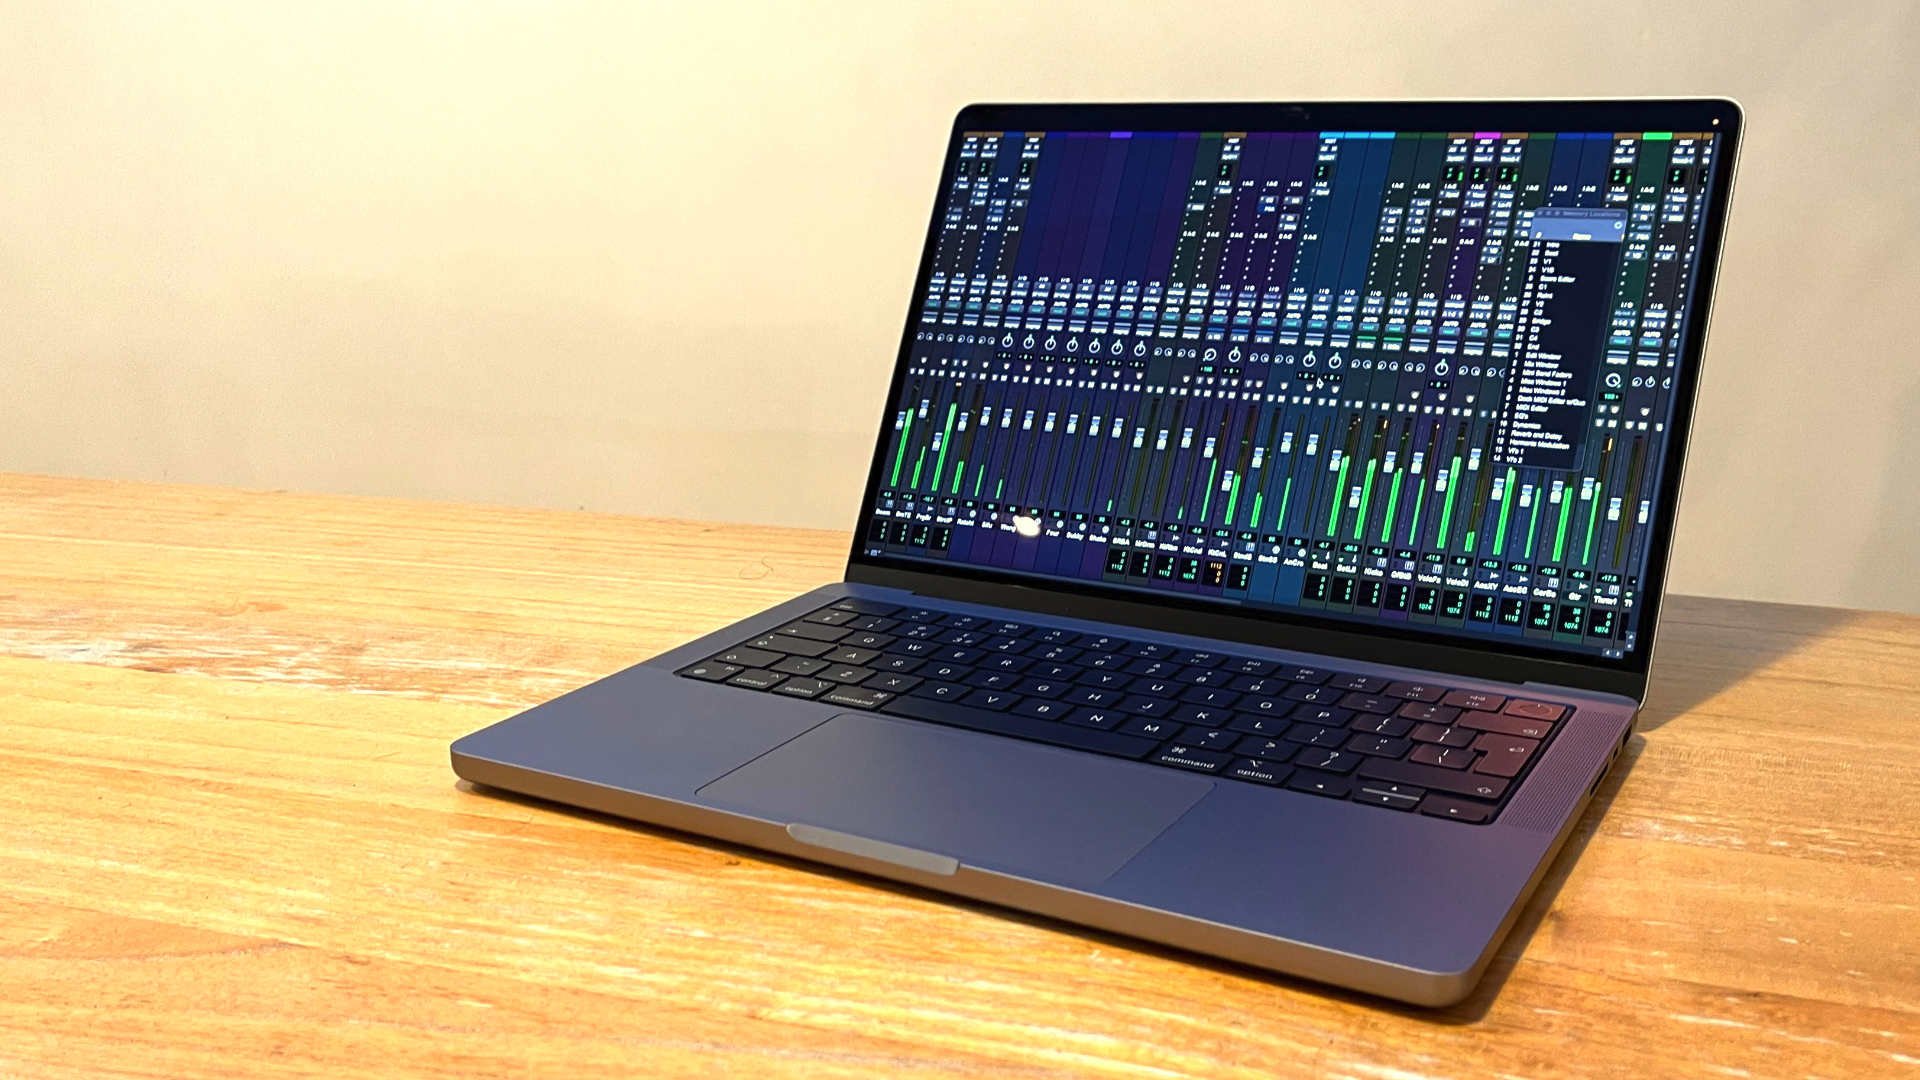 MacBook Pro 16 with M1 Pro SoC First Impressions: A Promising